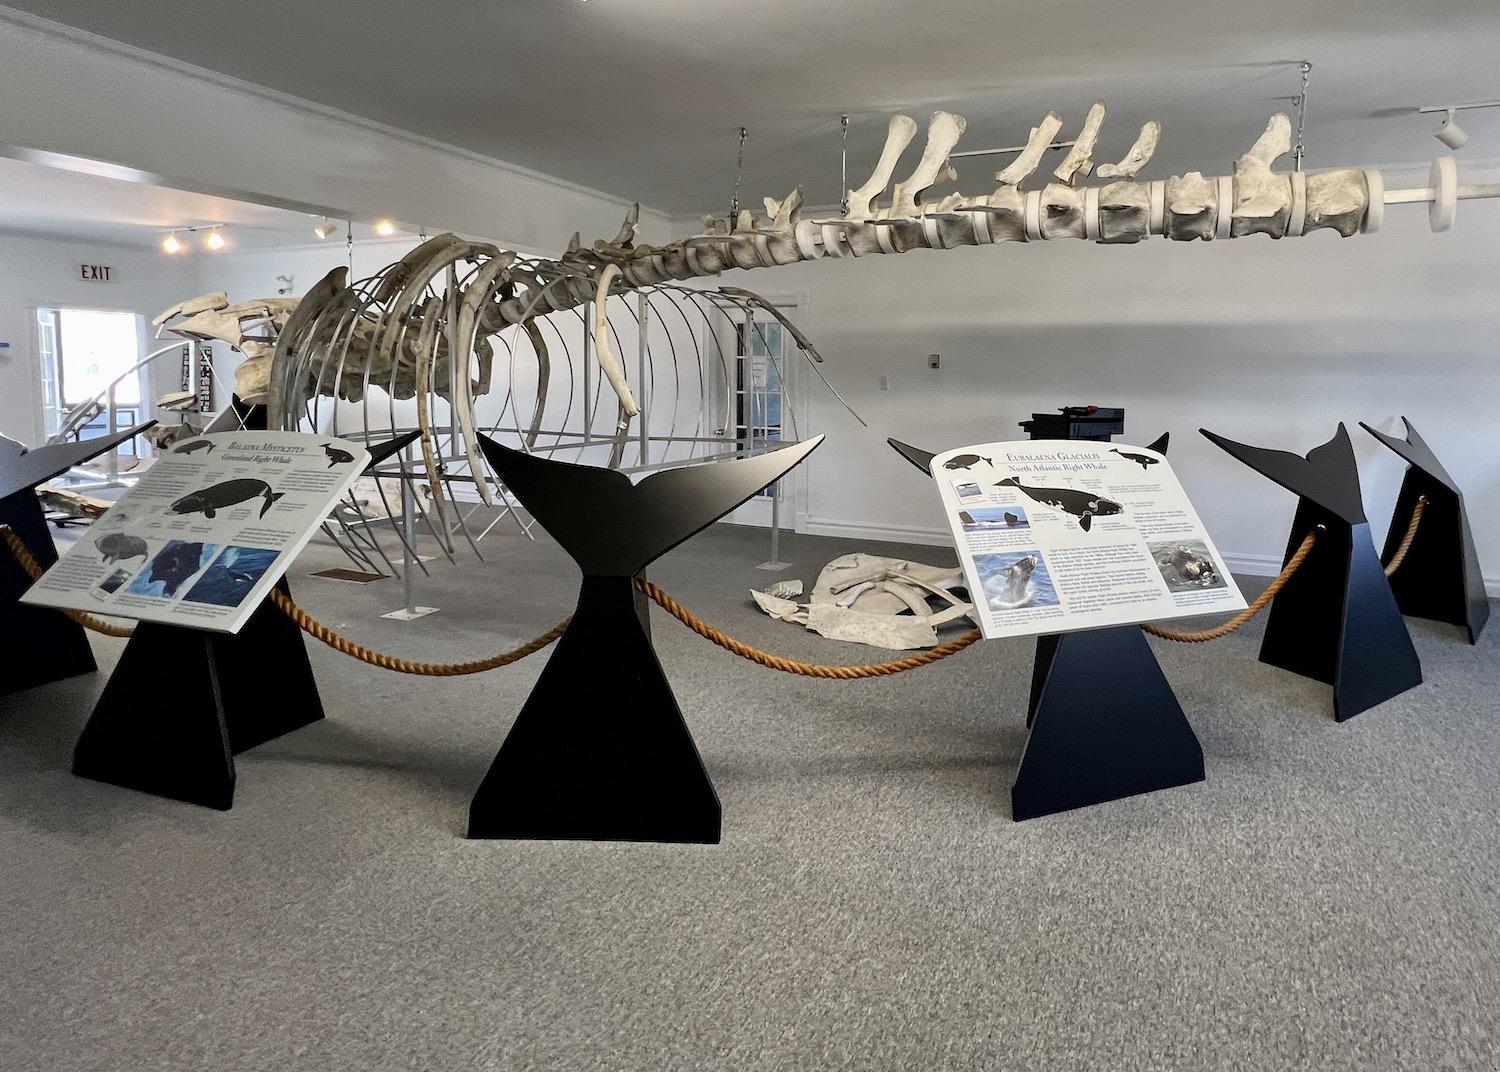 The skeleton of a right whale is on display in the Red Bay Town Hall.